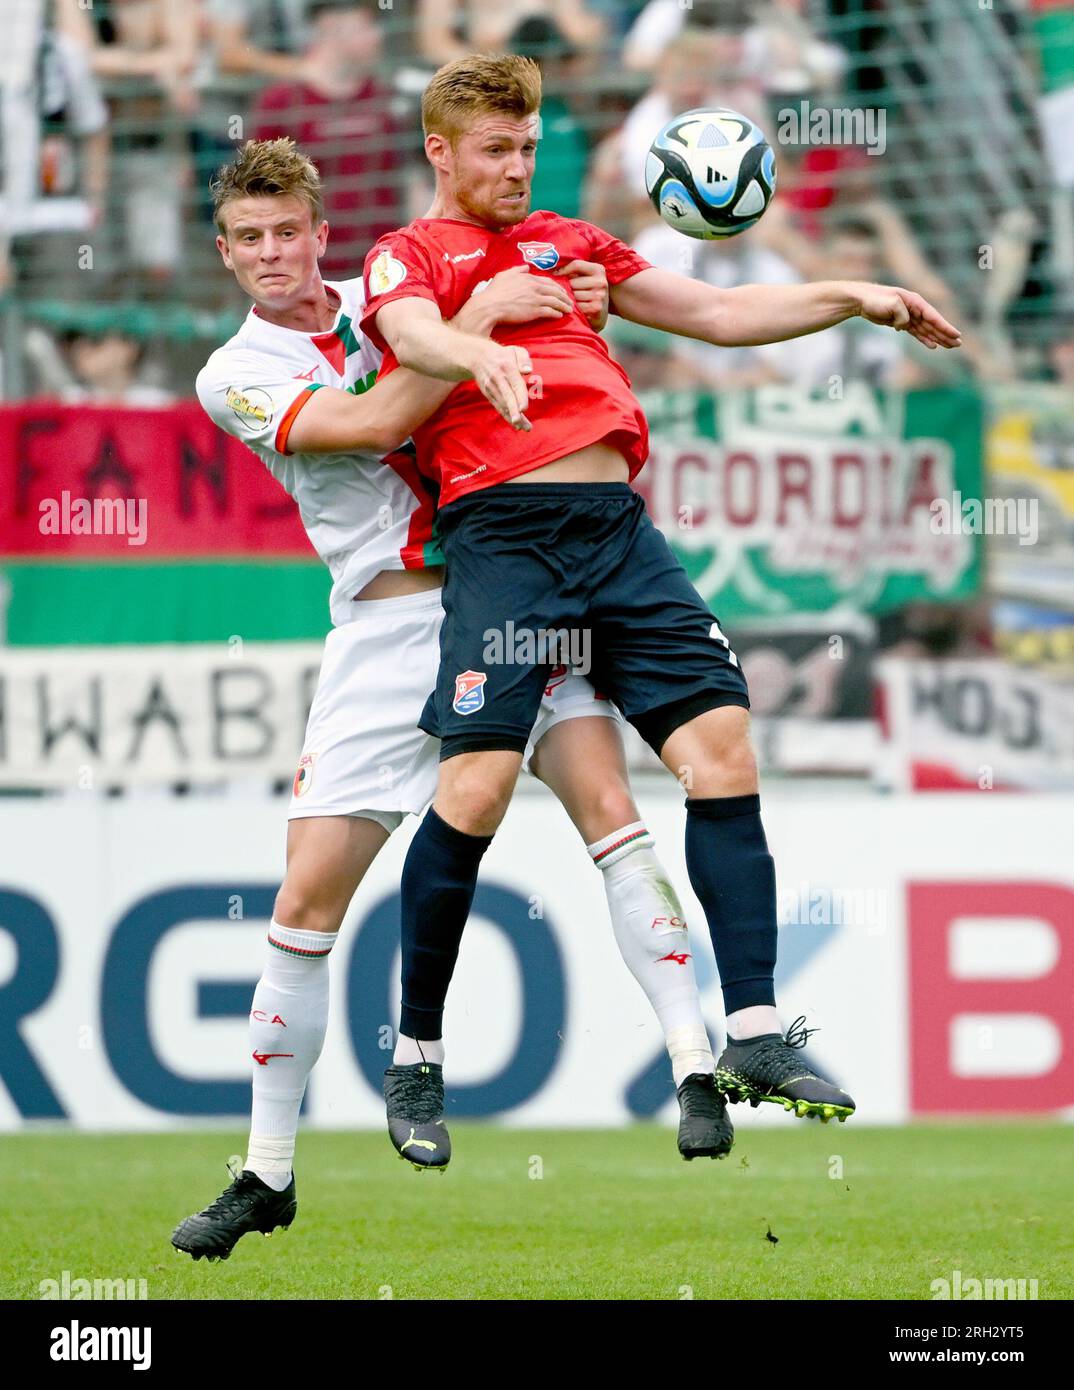 Unterhaching, Germany. 13th Aug, 2023. Soccer: DFB Cup, SpVgg Unterhaching - FC Augsburg, 1st round at Sportpark Unterhaching. Mathias Fetsch (r) of Unterhaching and Frederik Winther of Augsburg fight for the ball. Credit: Sven Hoppe/dpa - IMPORTANT NOTE: In accordance with the requirements of the DFL Deutsche Fußball Liga and the DFB Deutscher Fußball-Bund, it is prohibited to use or have used photographs taken in the stadium and/or of the match in the form of sequence pictures and/or video-like photo series./dpa/Alamy Live News Stock Photo